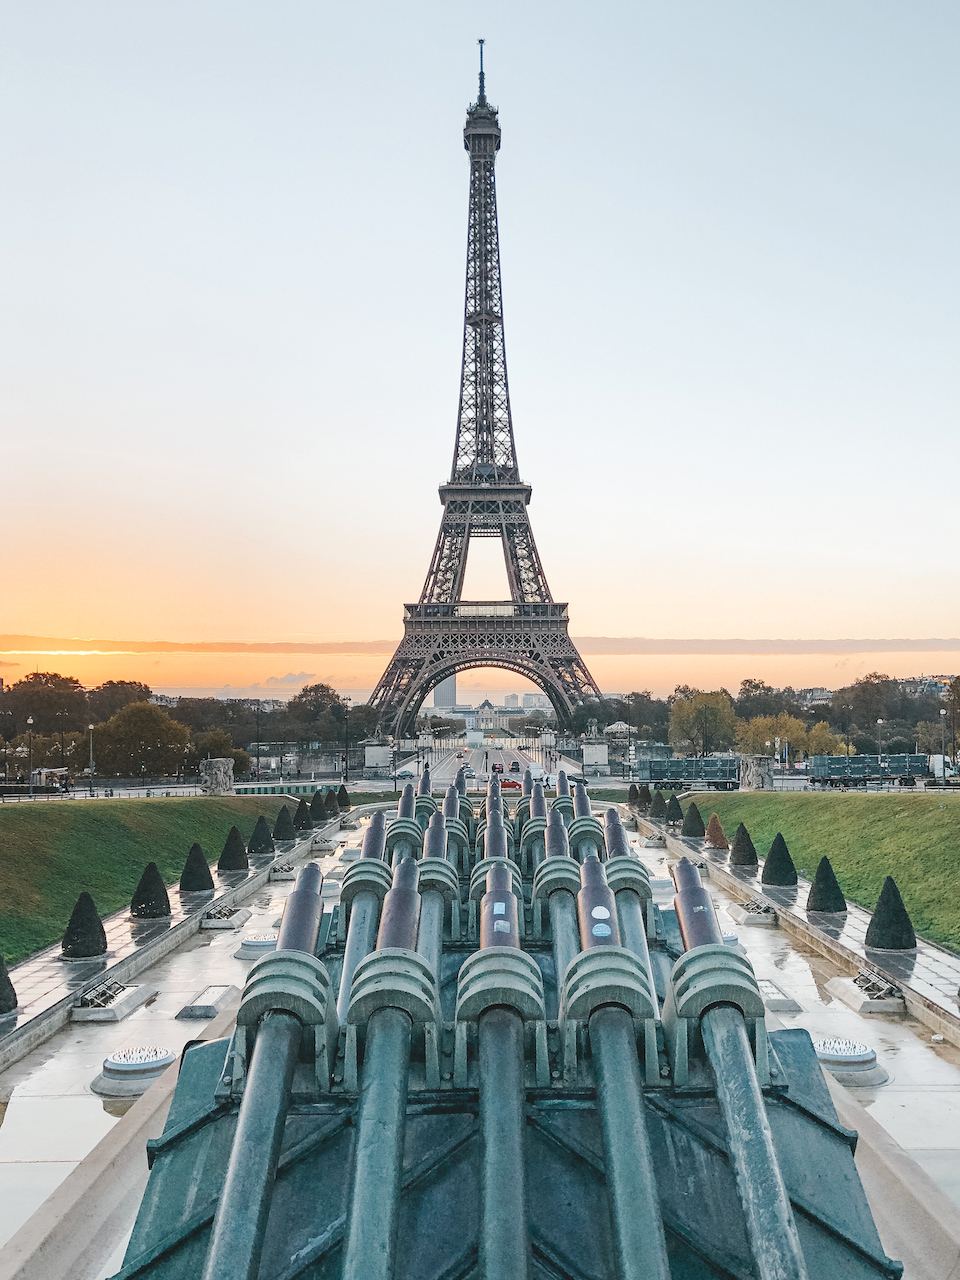 Canons pointing at the Eiffel Tower at sunrise - Paris - France